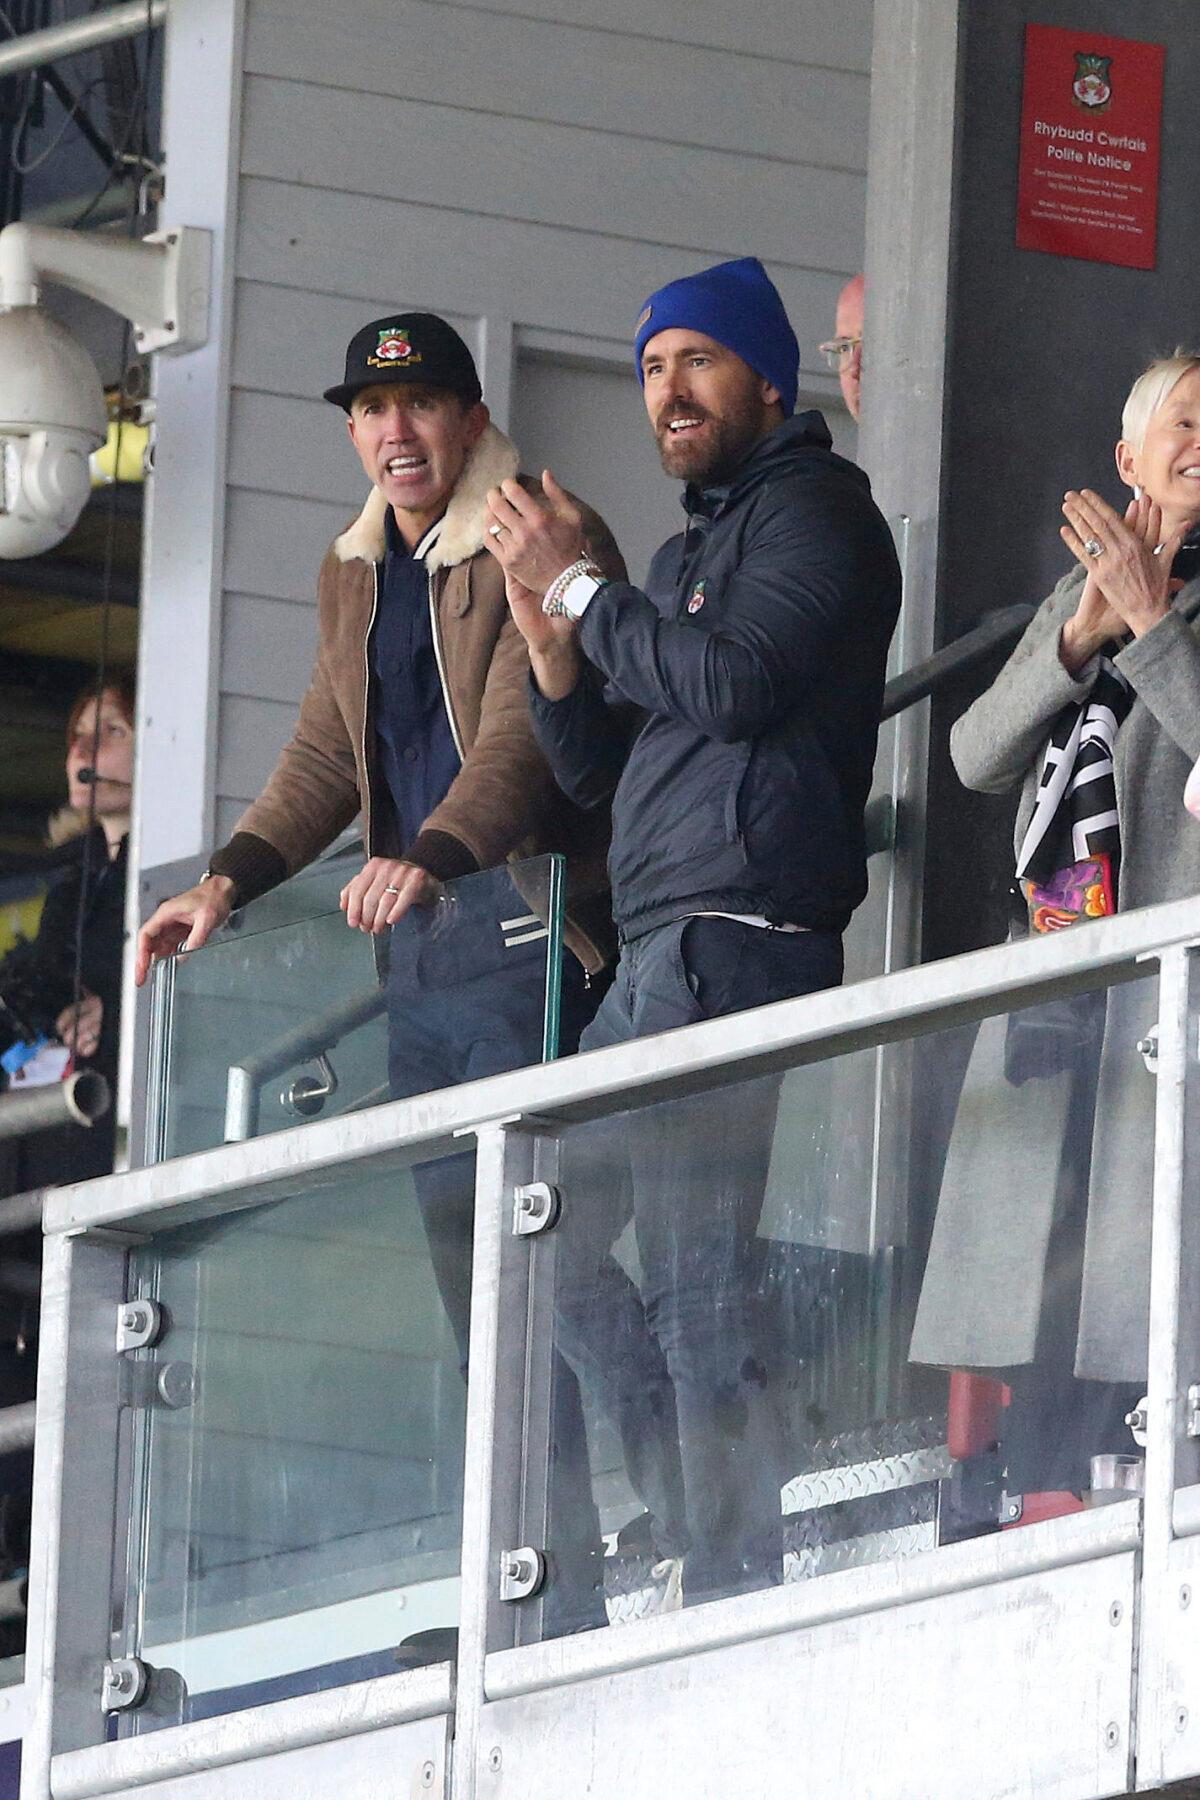 Wrexham owners Ryan Reynolds (R) and Rob McElhenney react during the National League match between Wrexham and Notts County at the Racecourse Ground in Wrexham, Wales, on April 10, 2023. (Barrington Coombs/PA via AP)